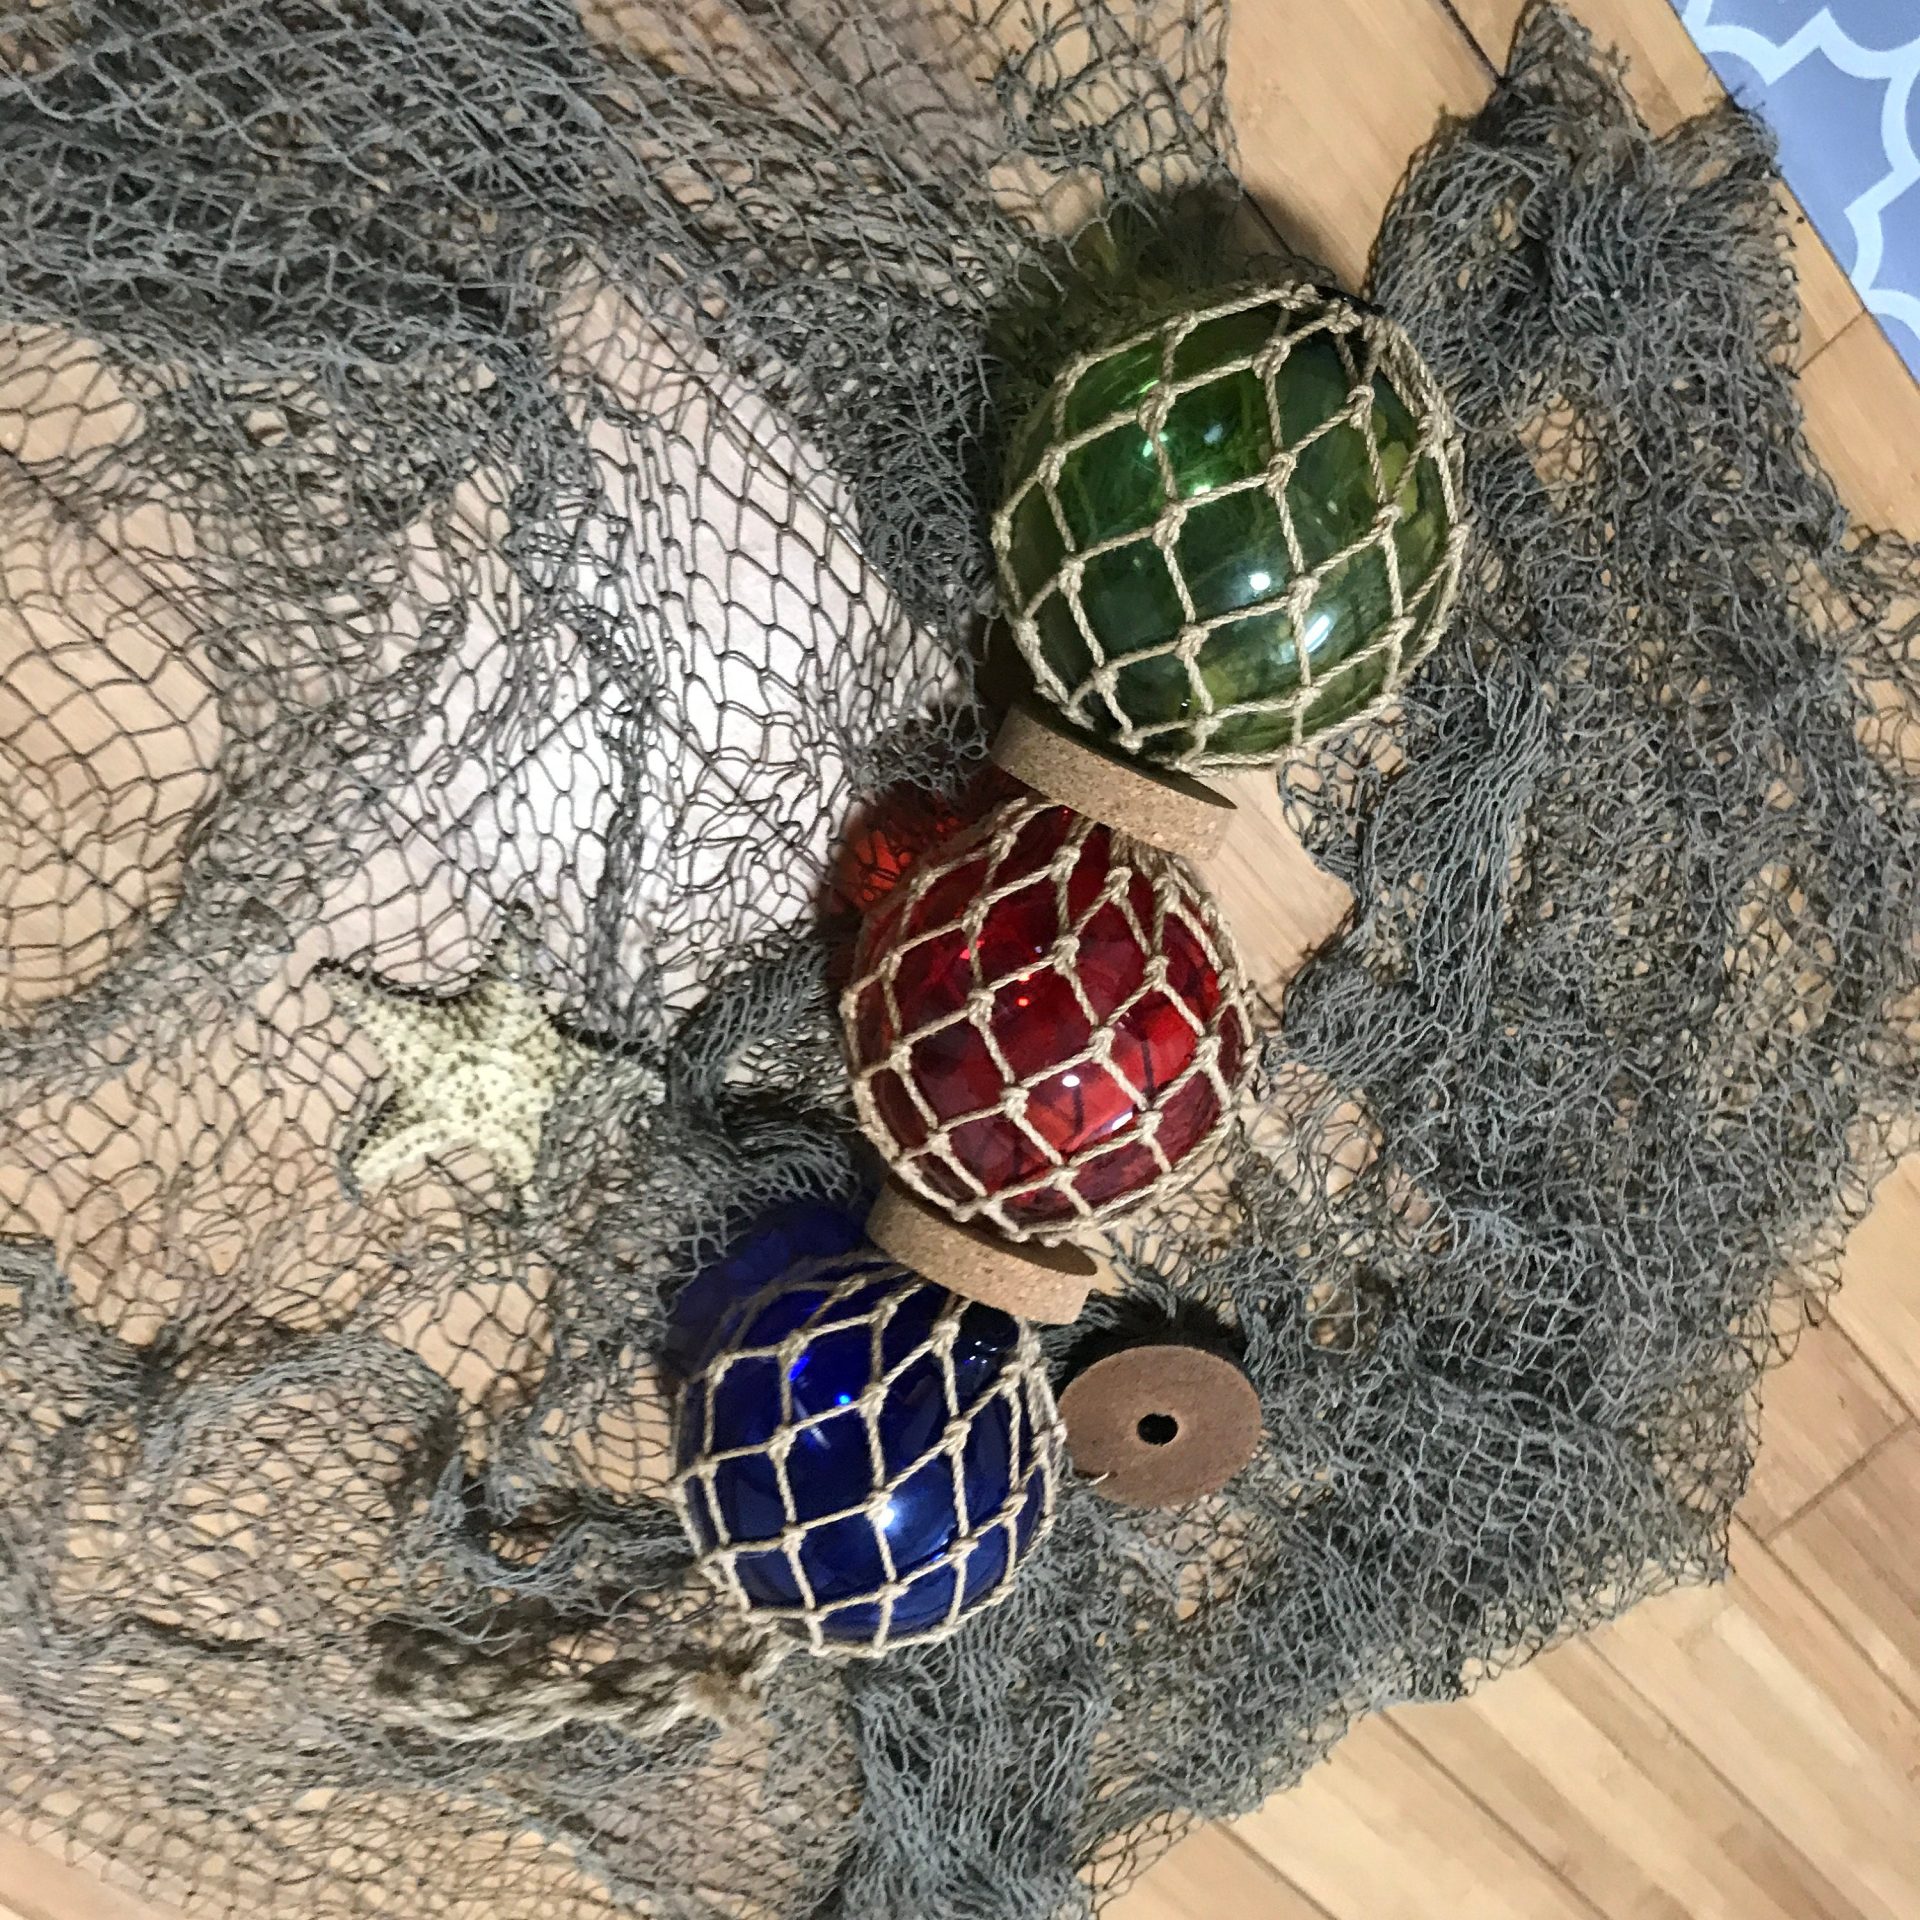 Japanese Casting Net with wooden floats and Nautical glass floats